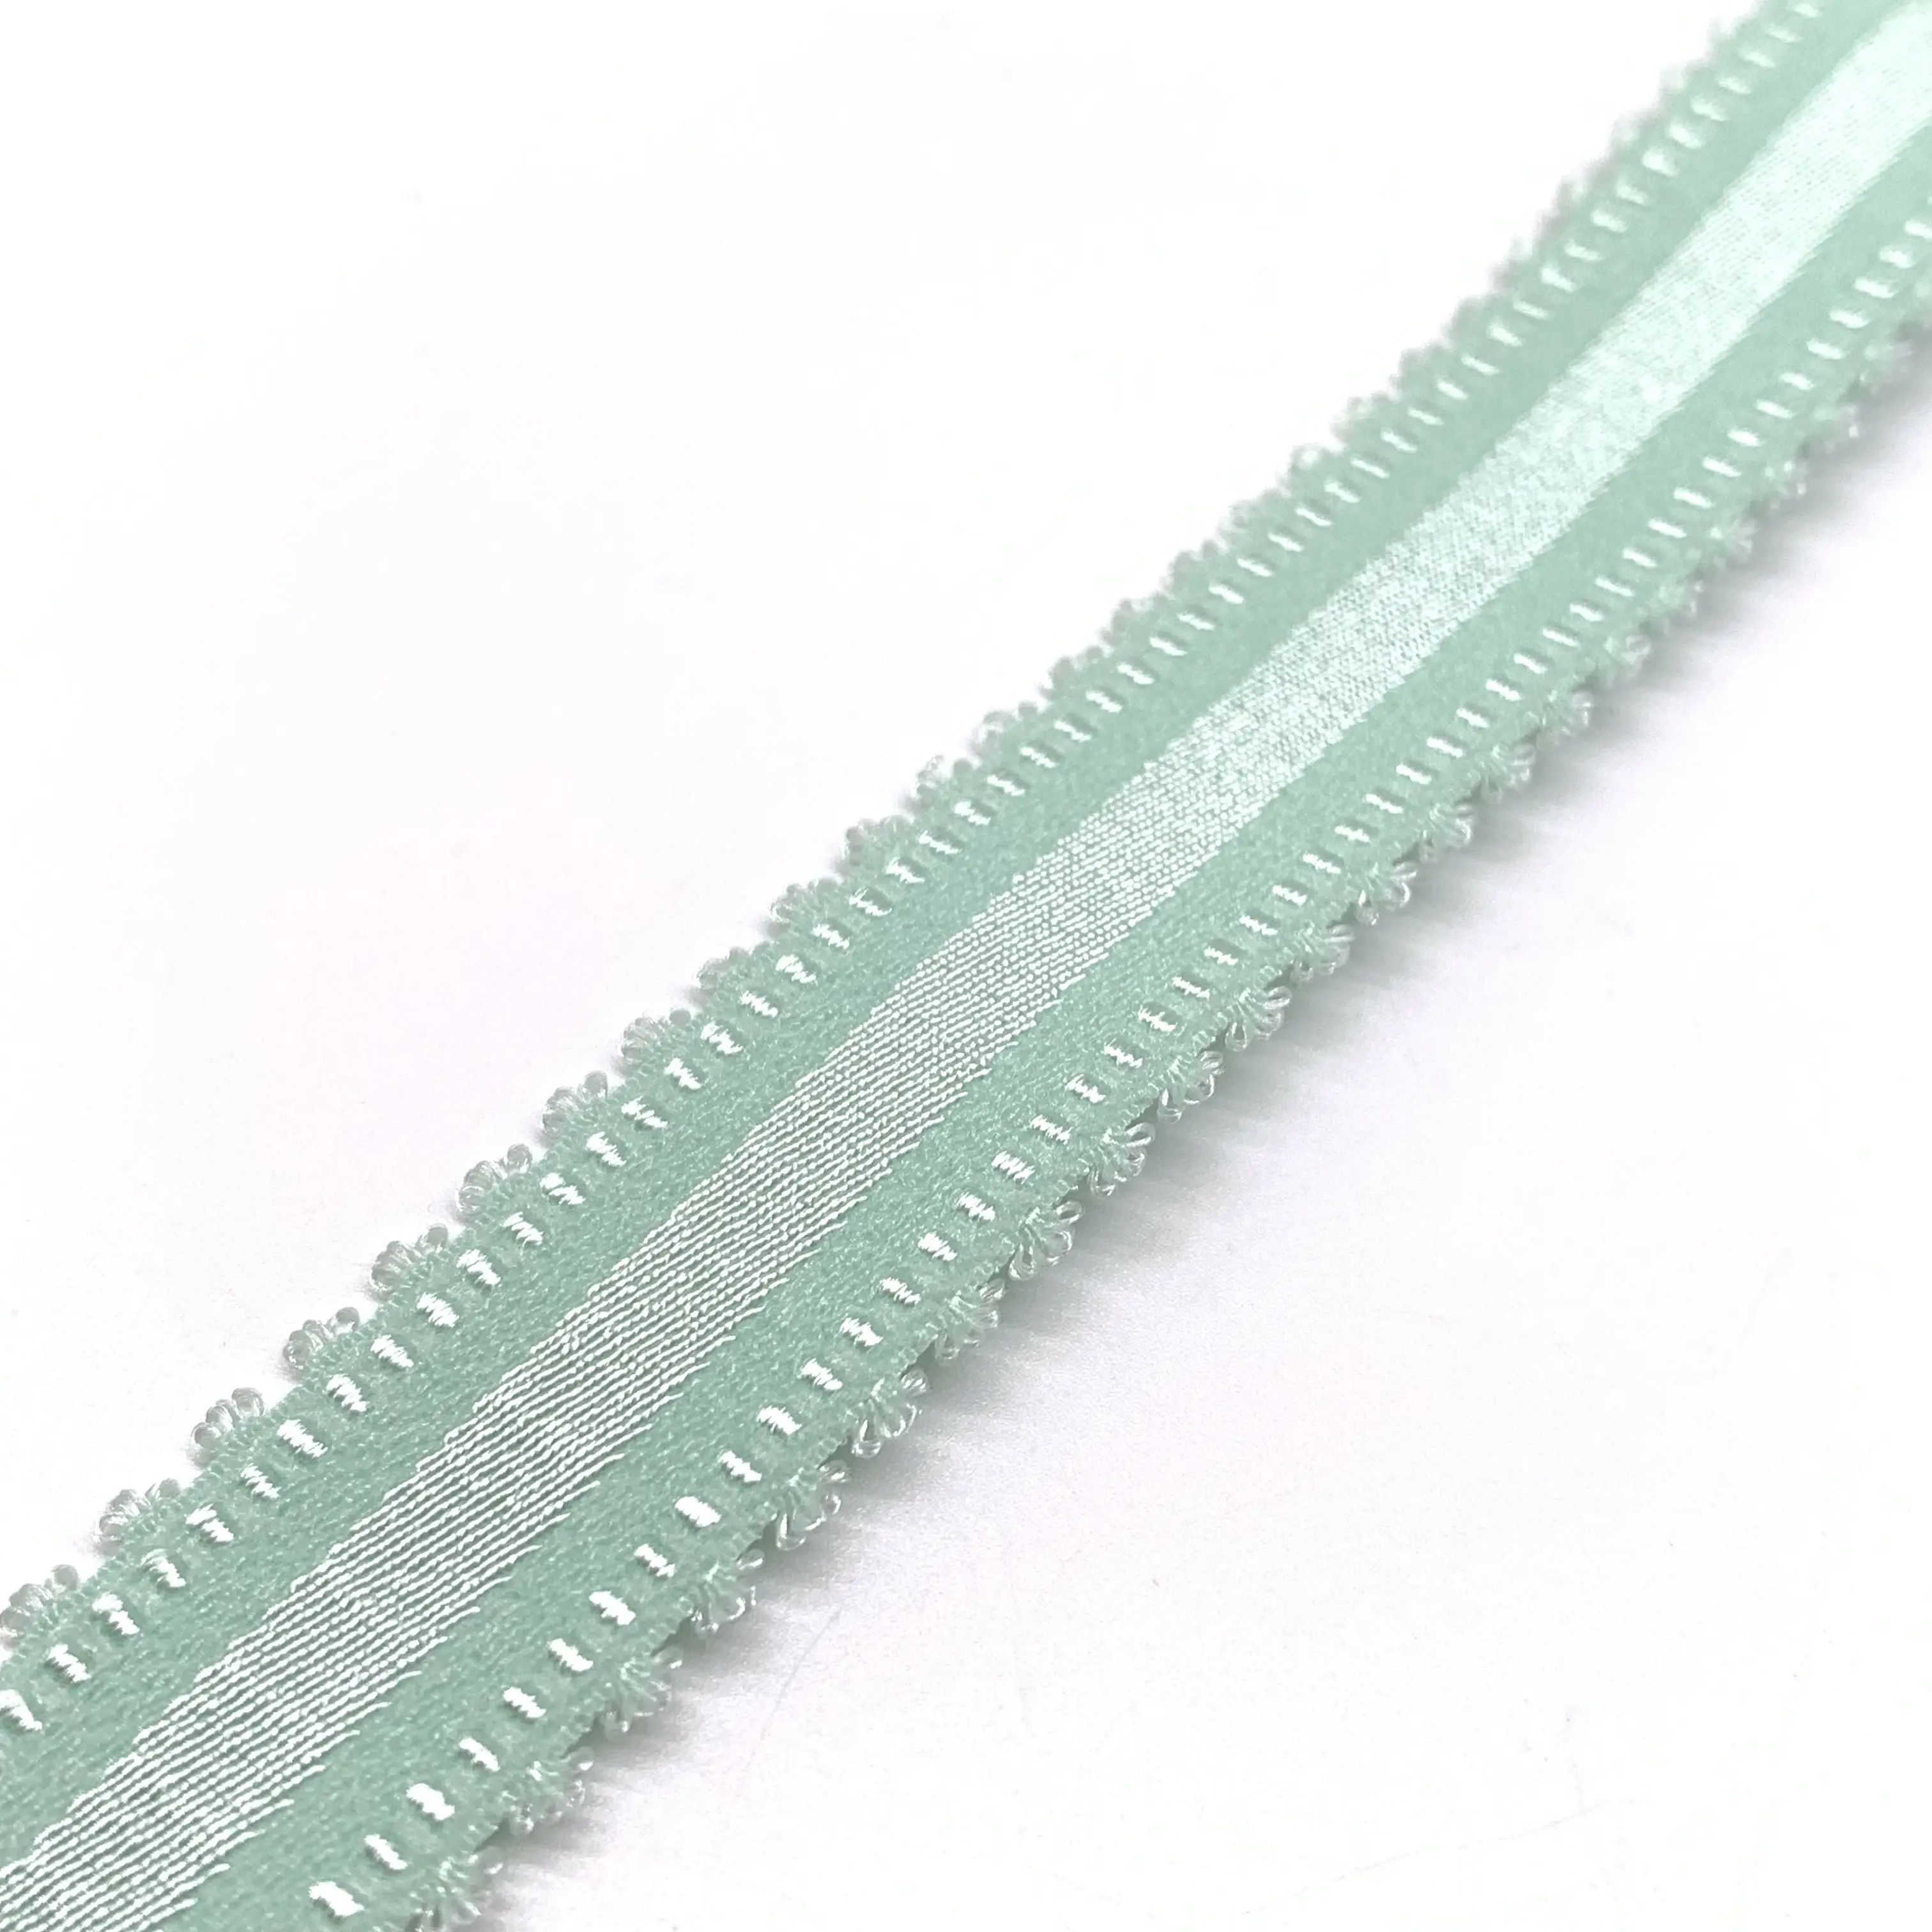 18 mm Sexy lingerie straps with high-quality nylon elastic webbing and shiny elastic bands